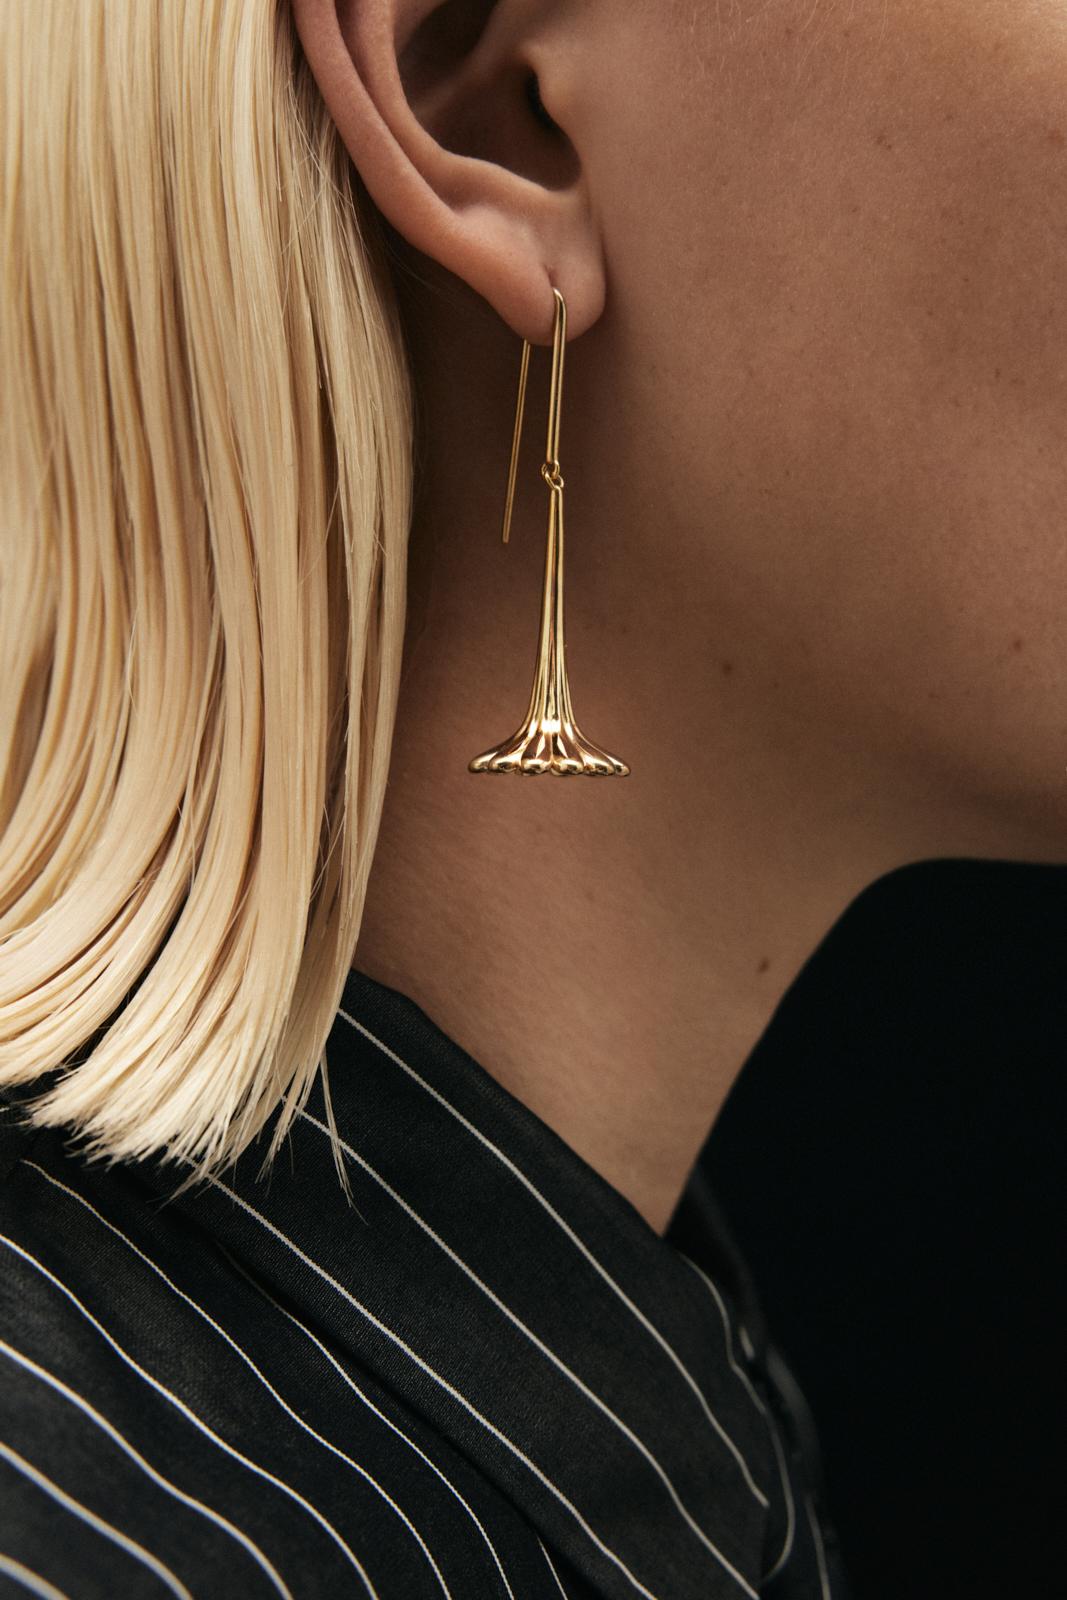 Phase 3 Single Earring Gold Plated